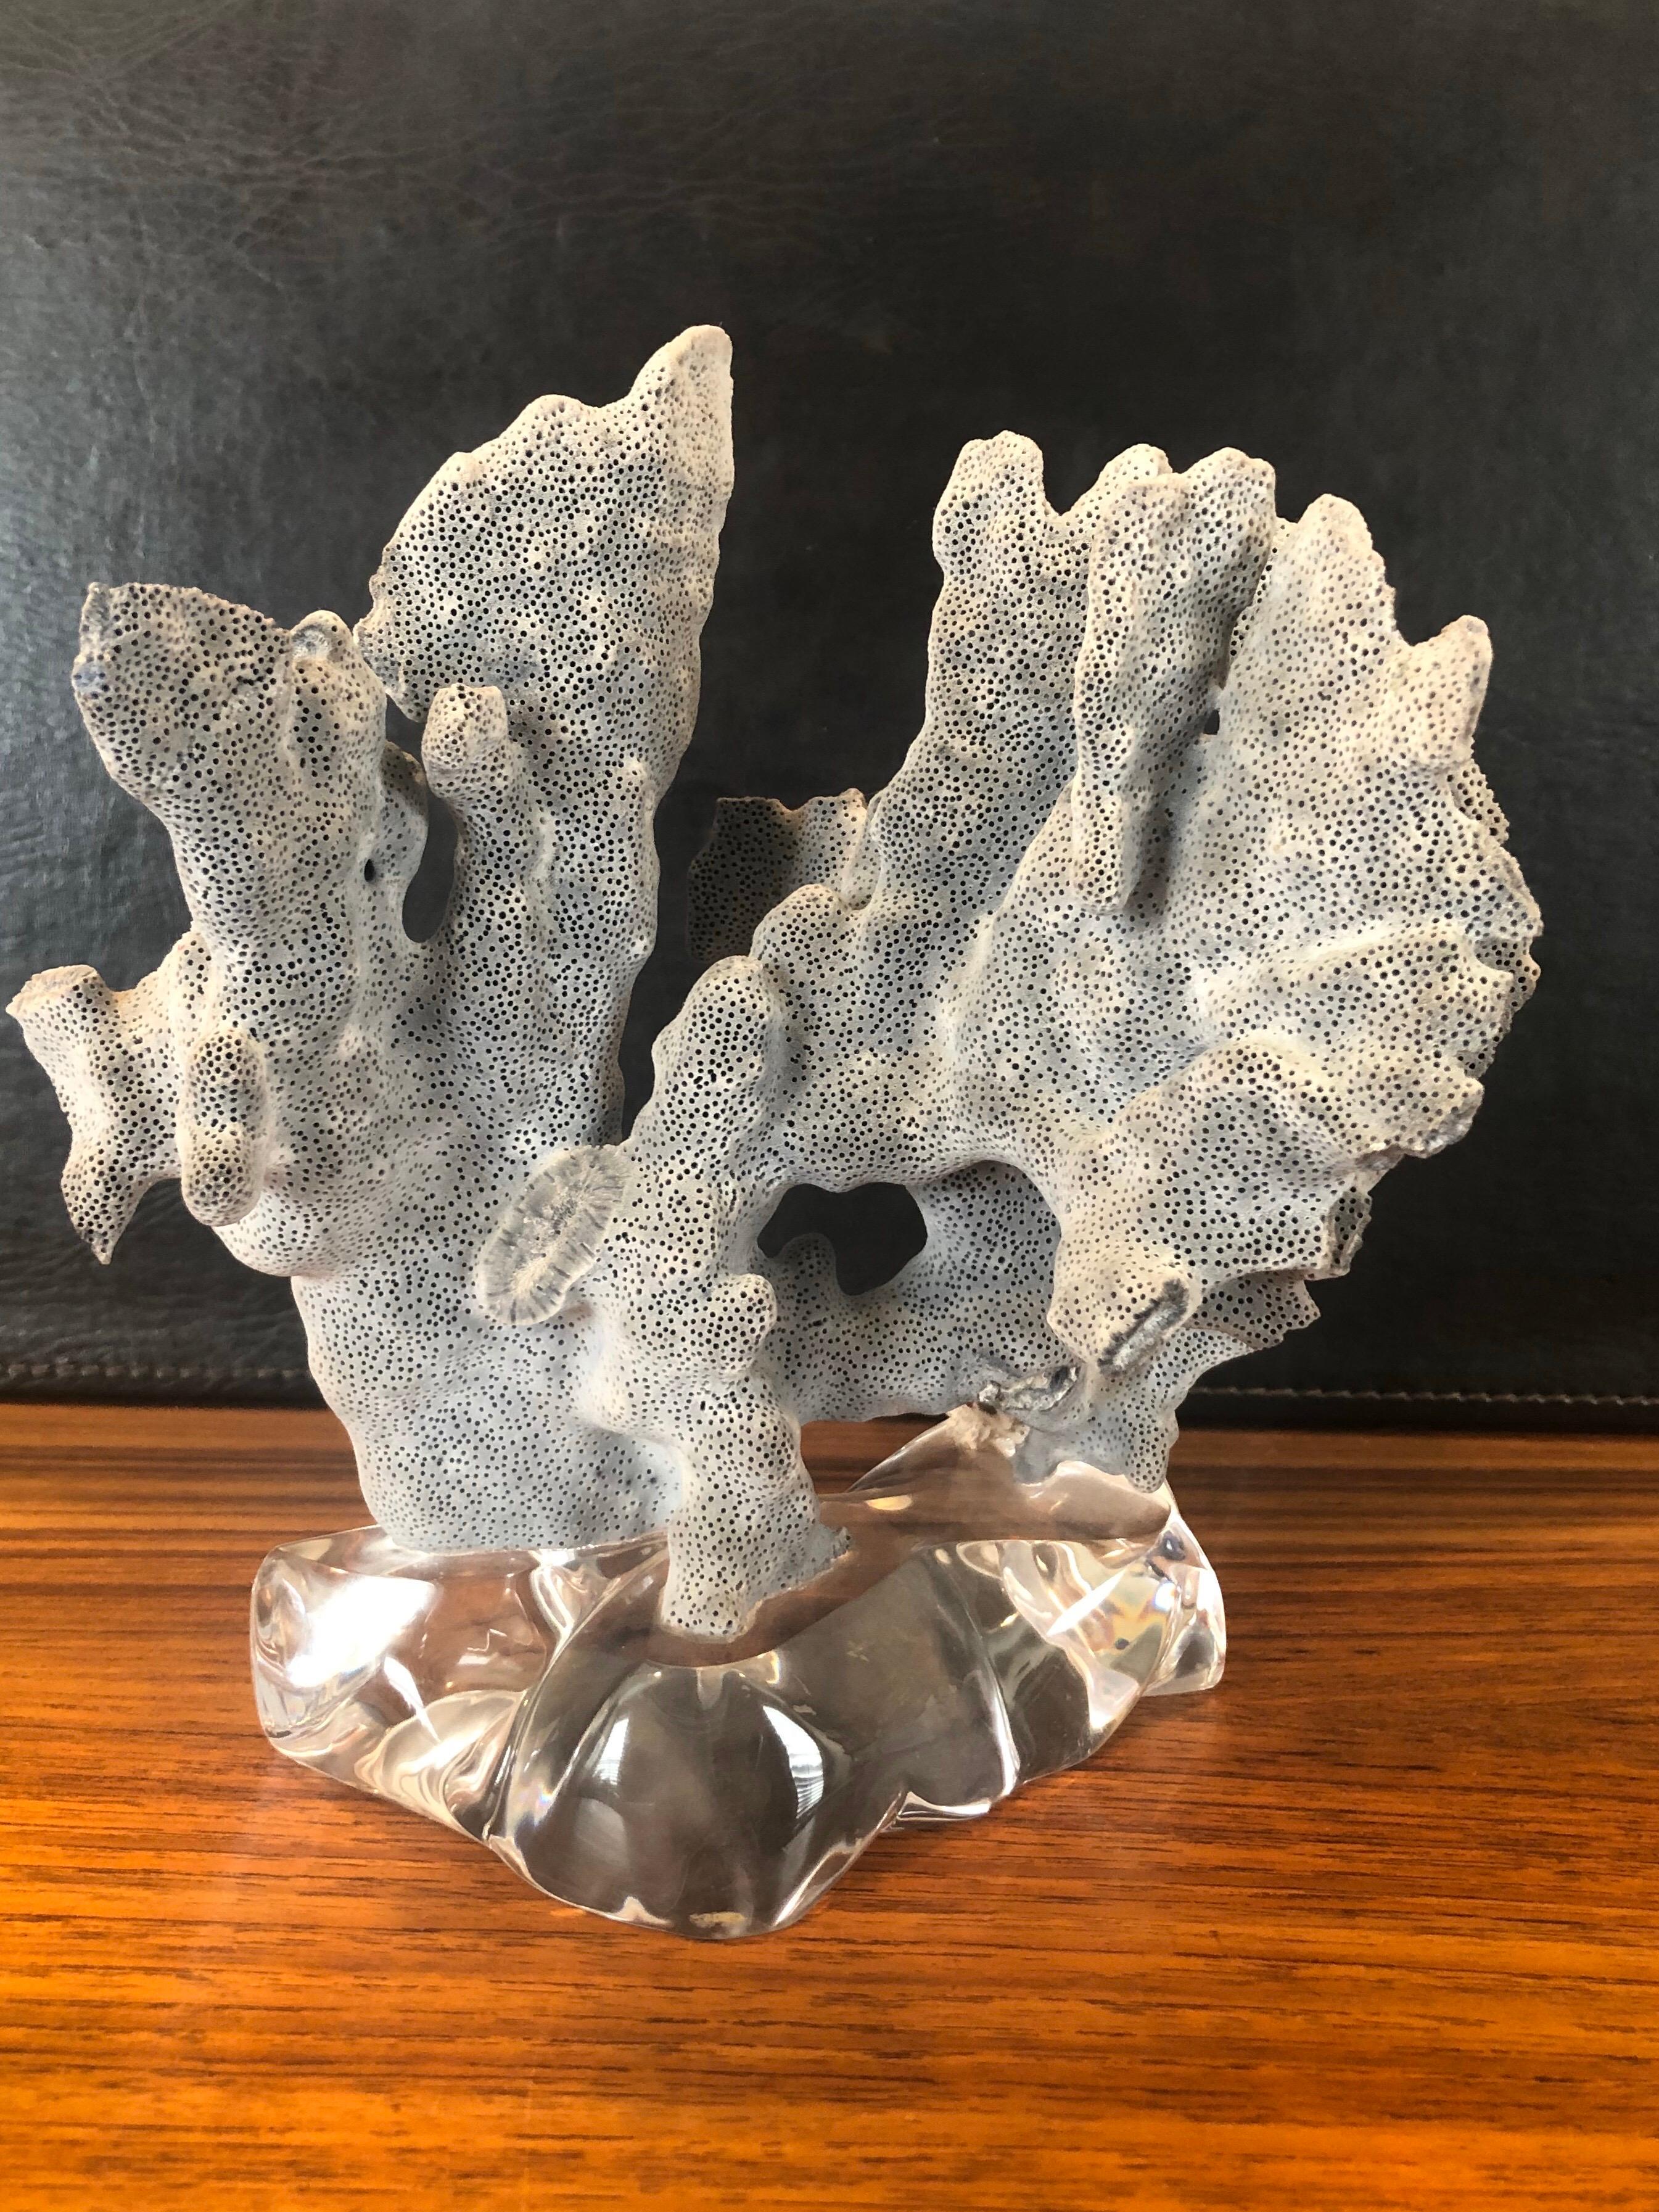 A beautiful blue coral organic specimen mounted on a solid 1.5